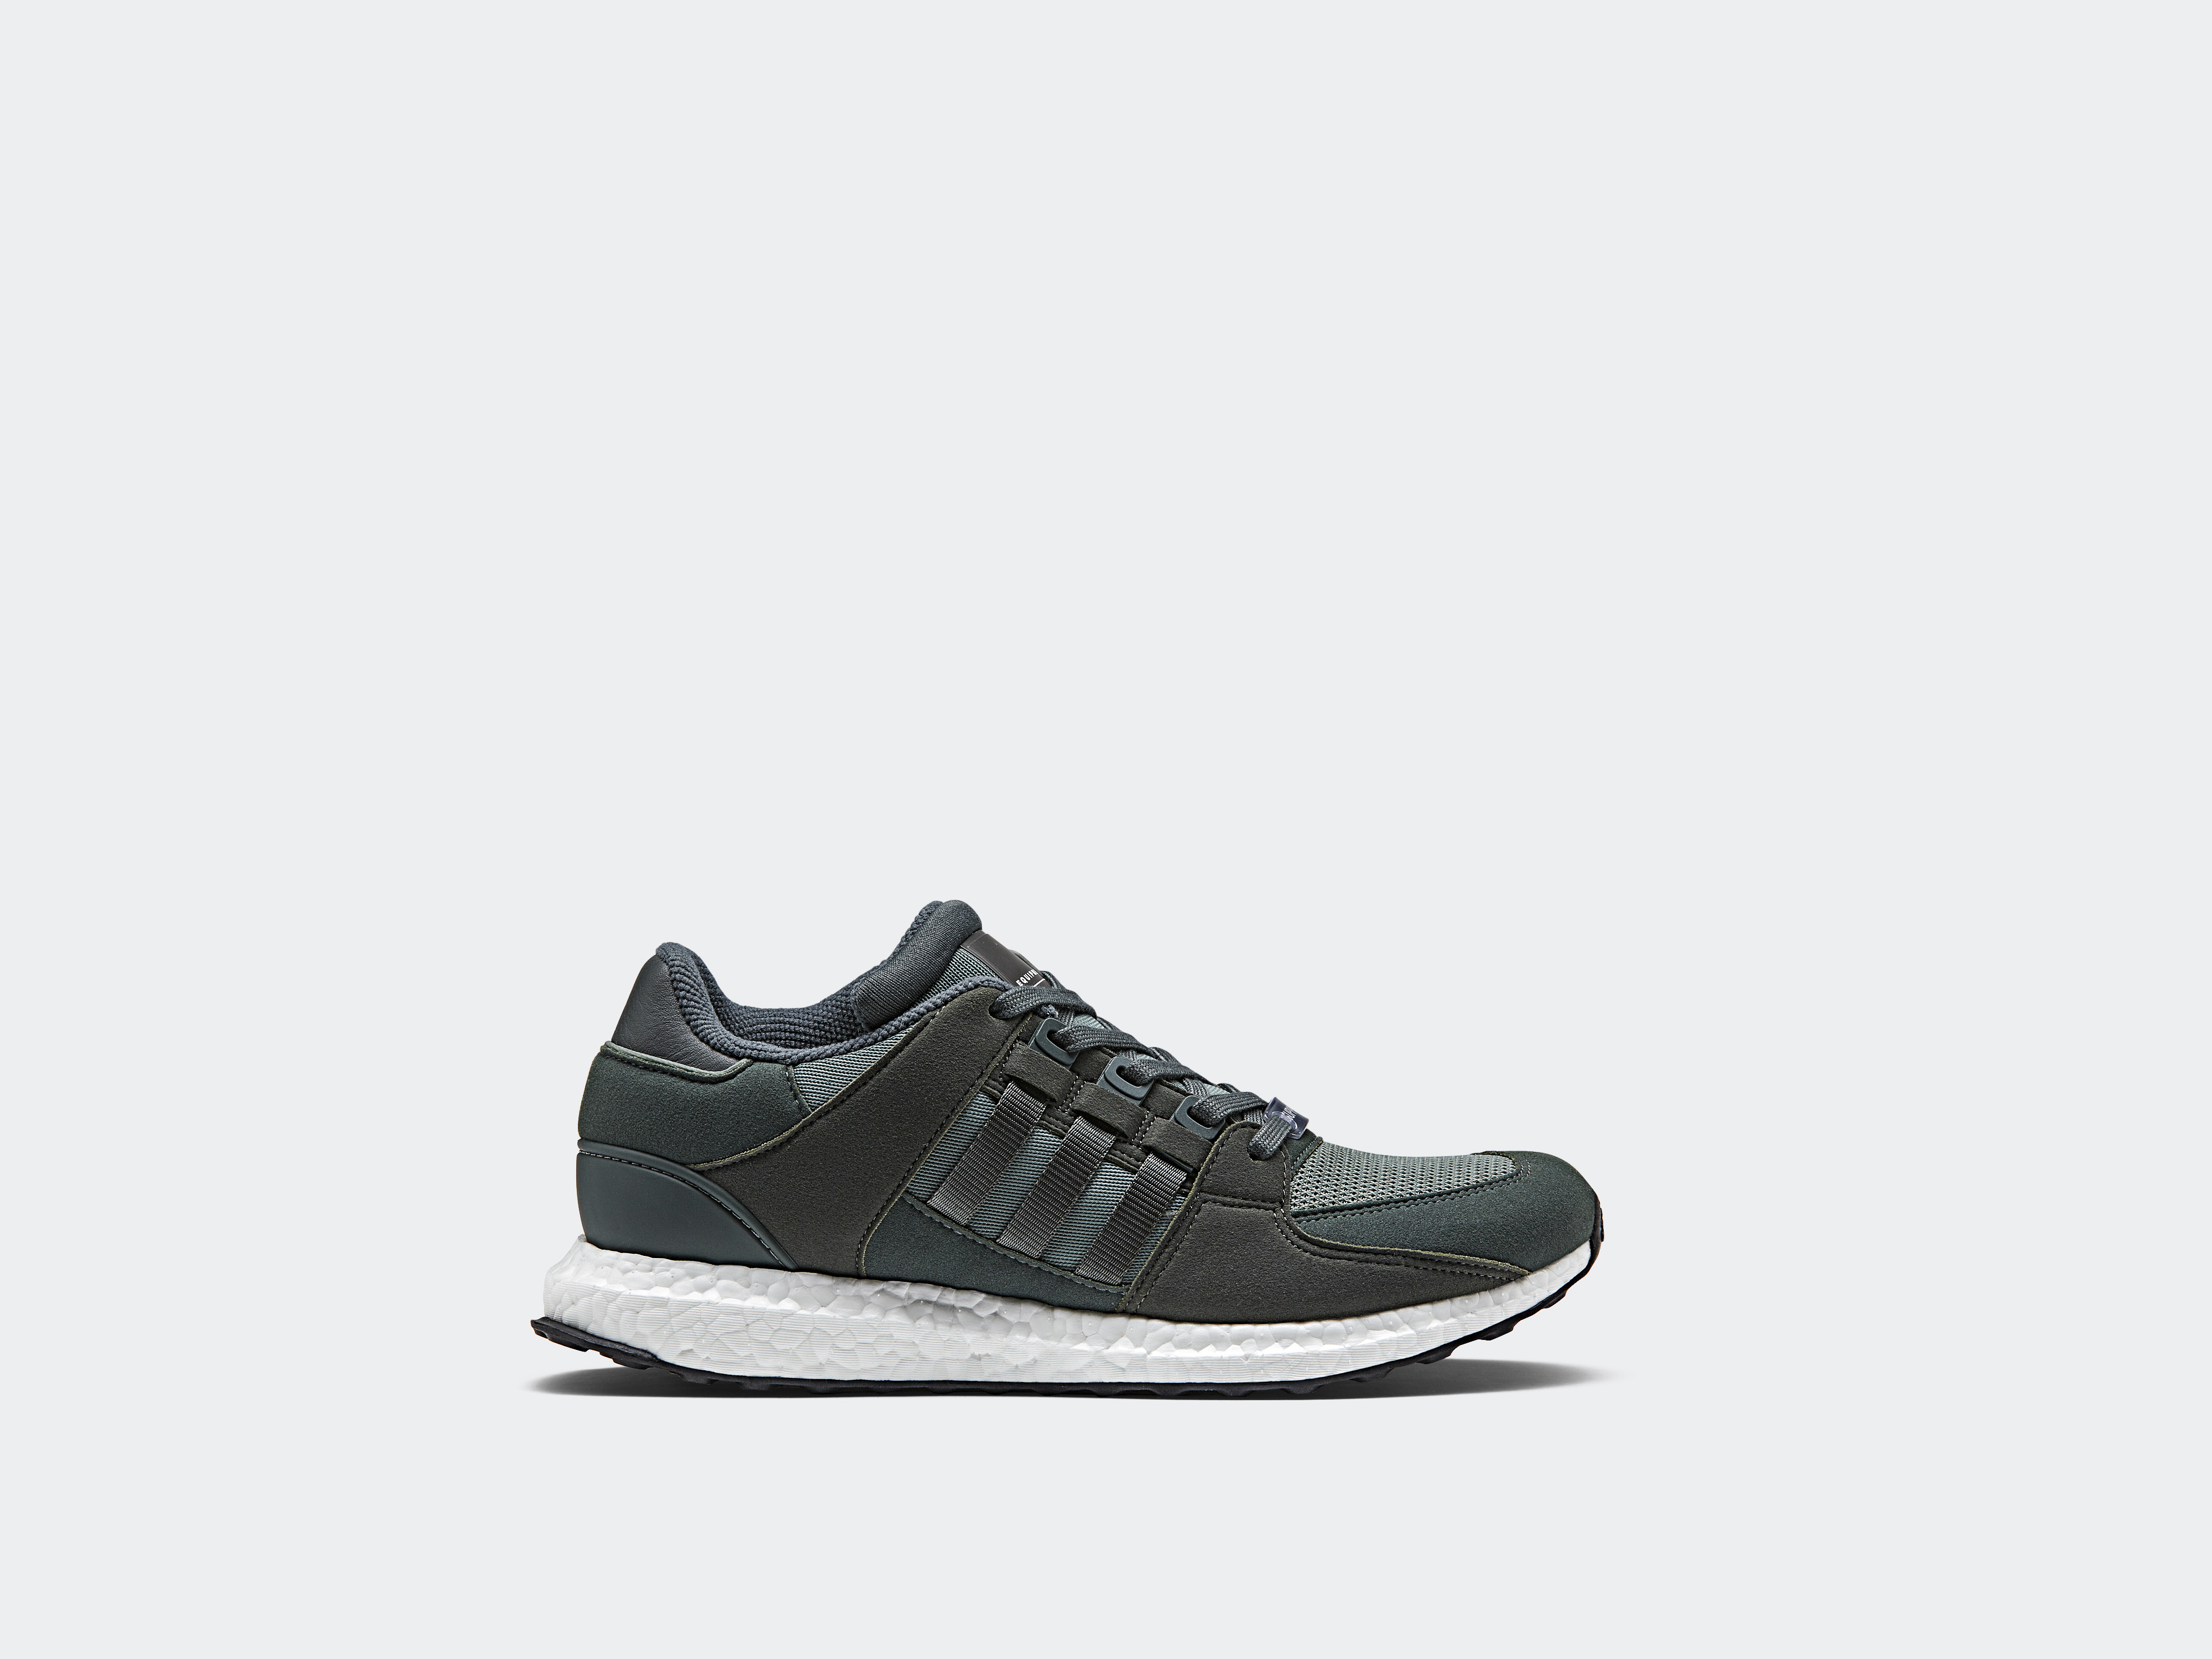 adidas EQT support ultra Muted Premium Pack 3